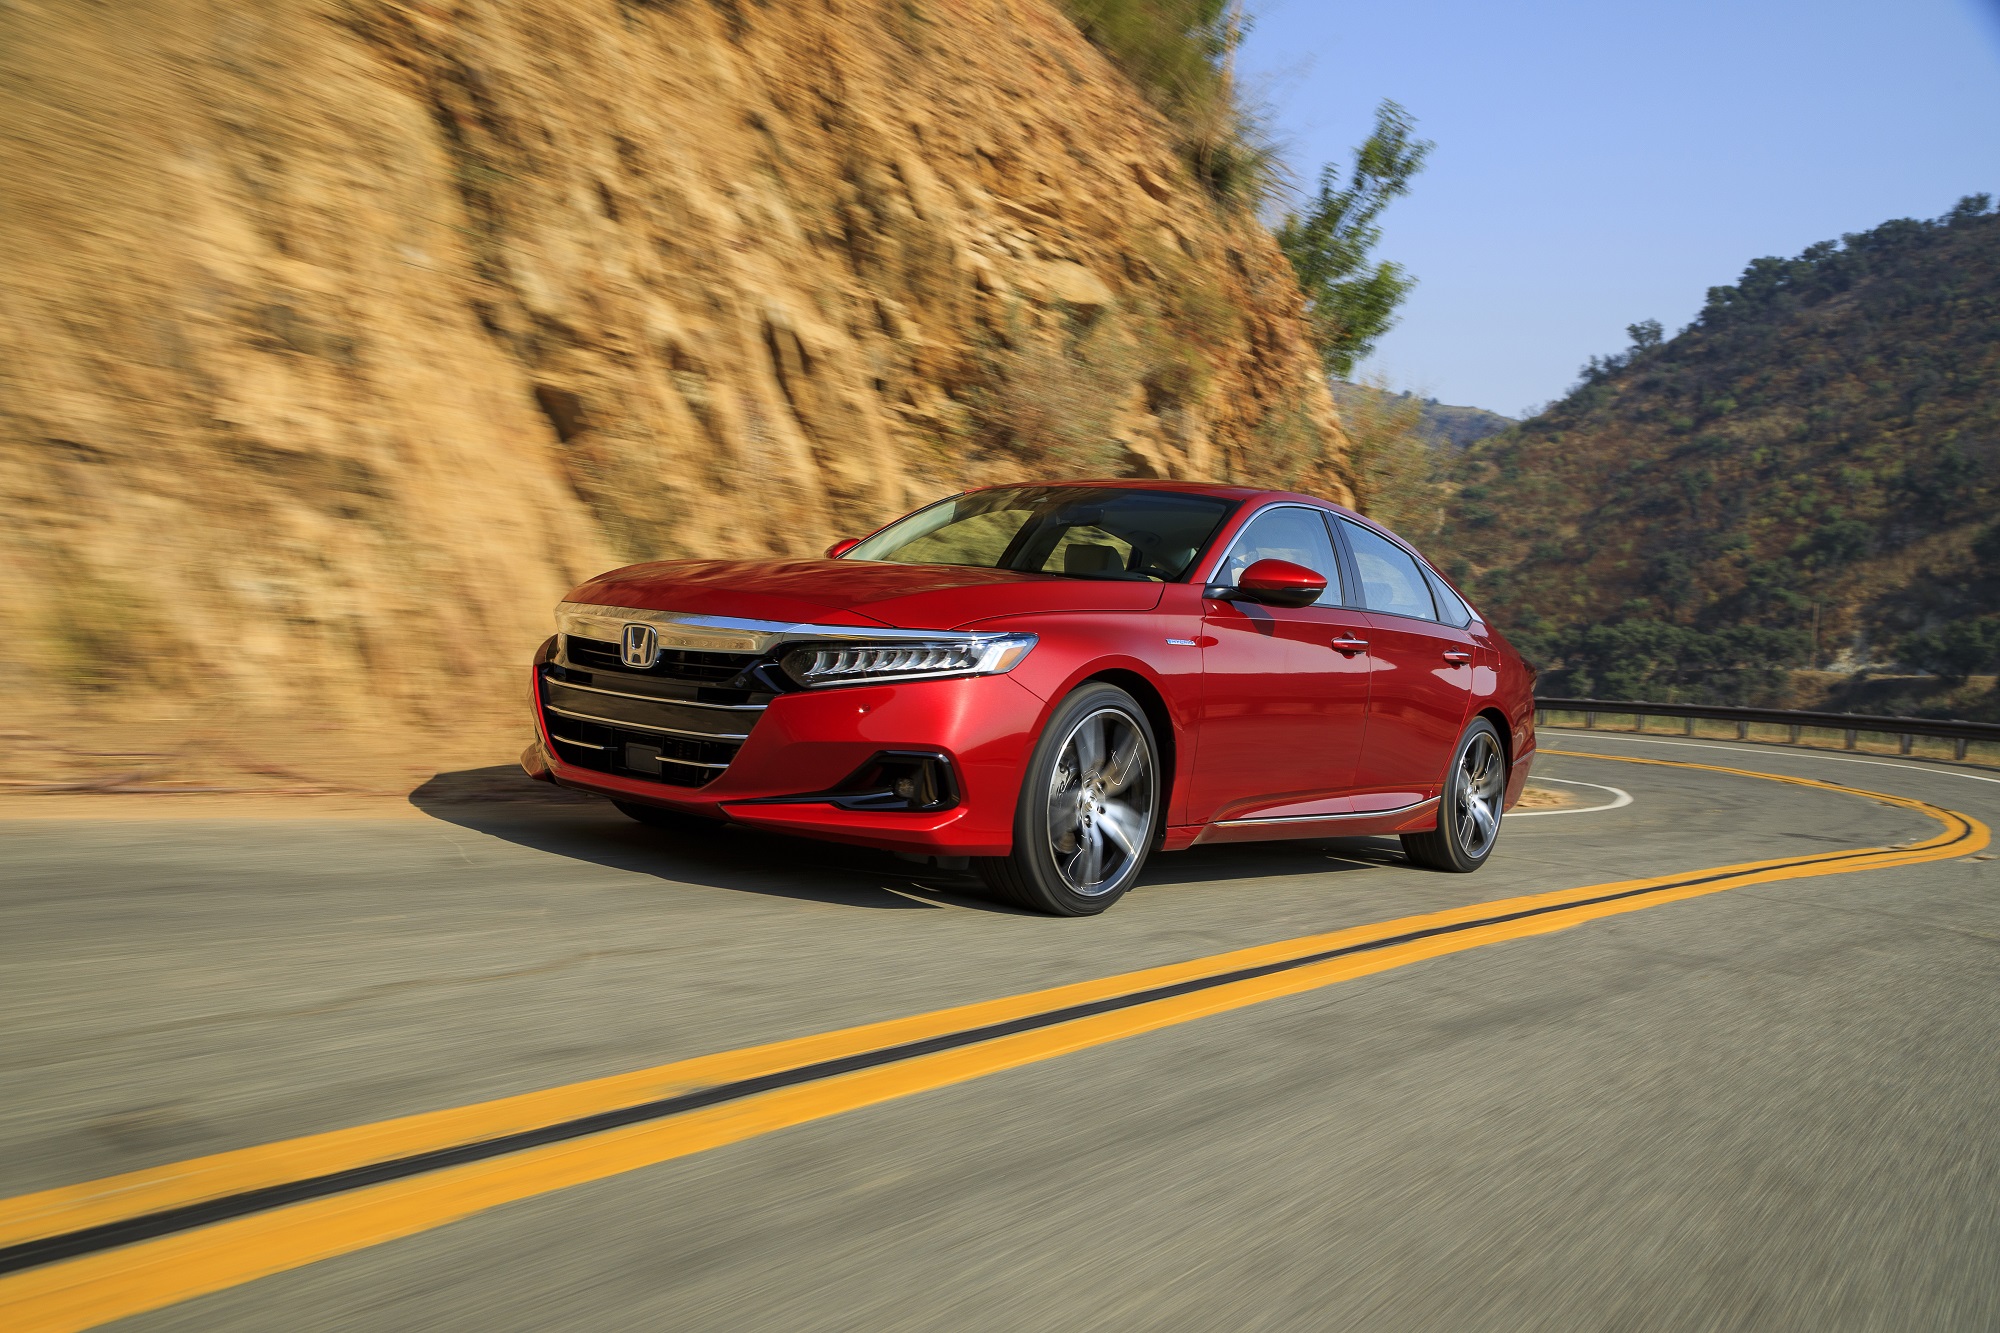 The Honda Accord, like this red one, has a spot on the list of mid-size cars that cost the least to own.